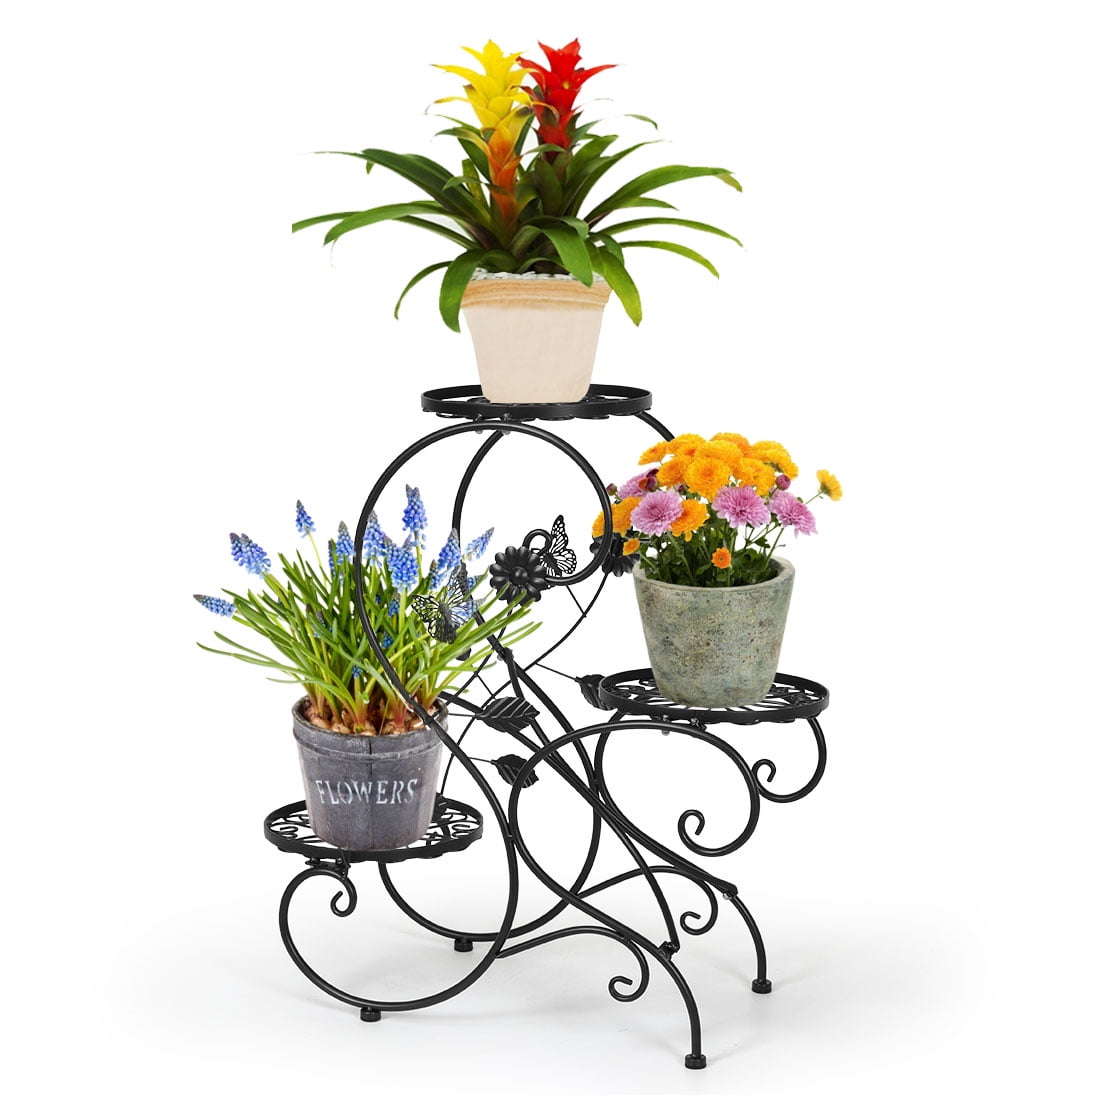 3 TIER Metal Bicycle Pot Plant Stand Home Garden Study Patio Decor Beauty 